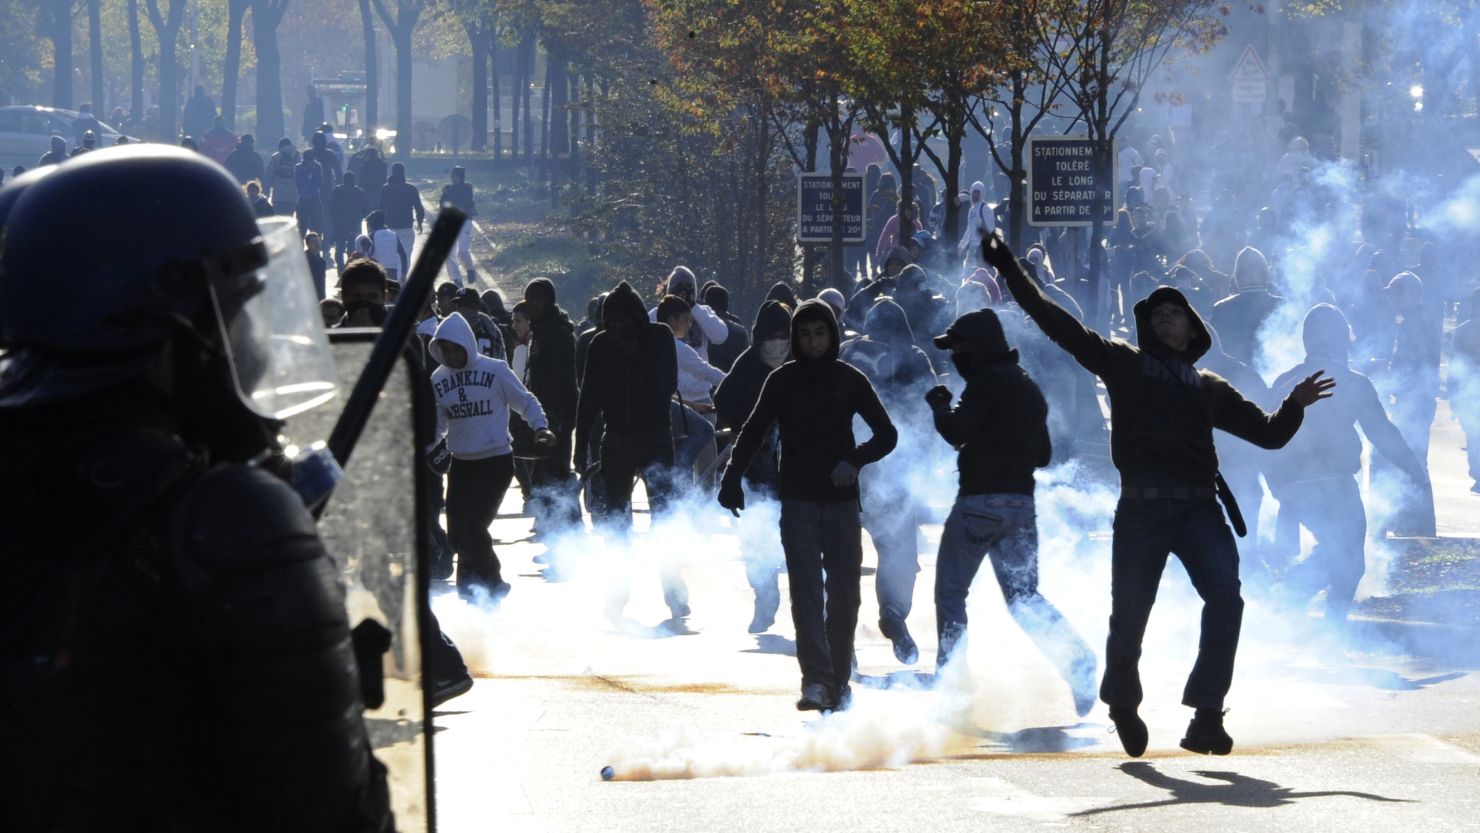 The deprived suburbs of Paris and France's other major cities have been the scene of riots in recent years.